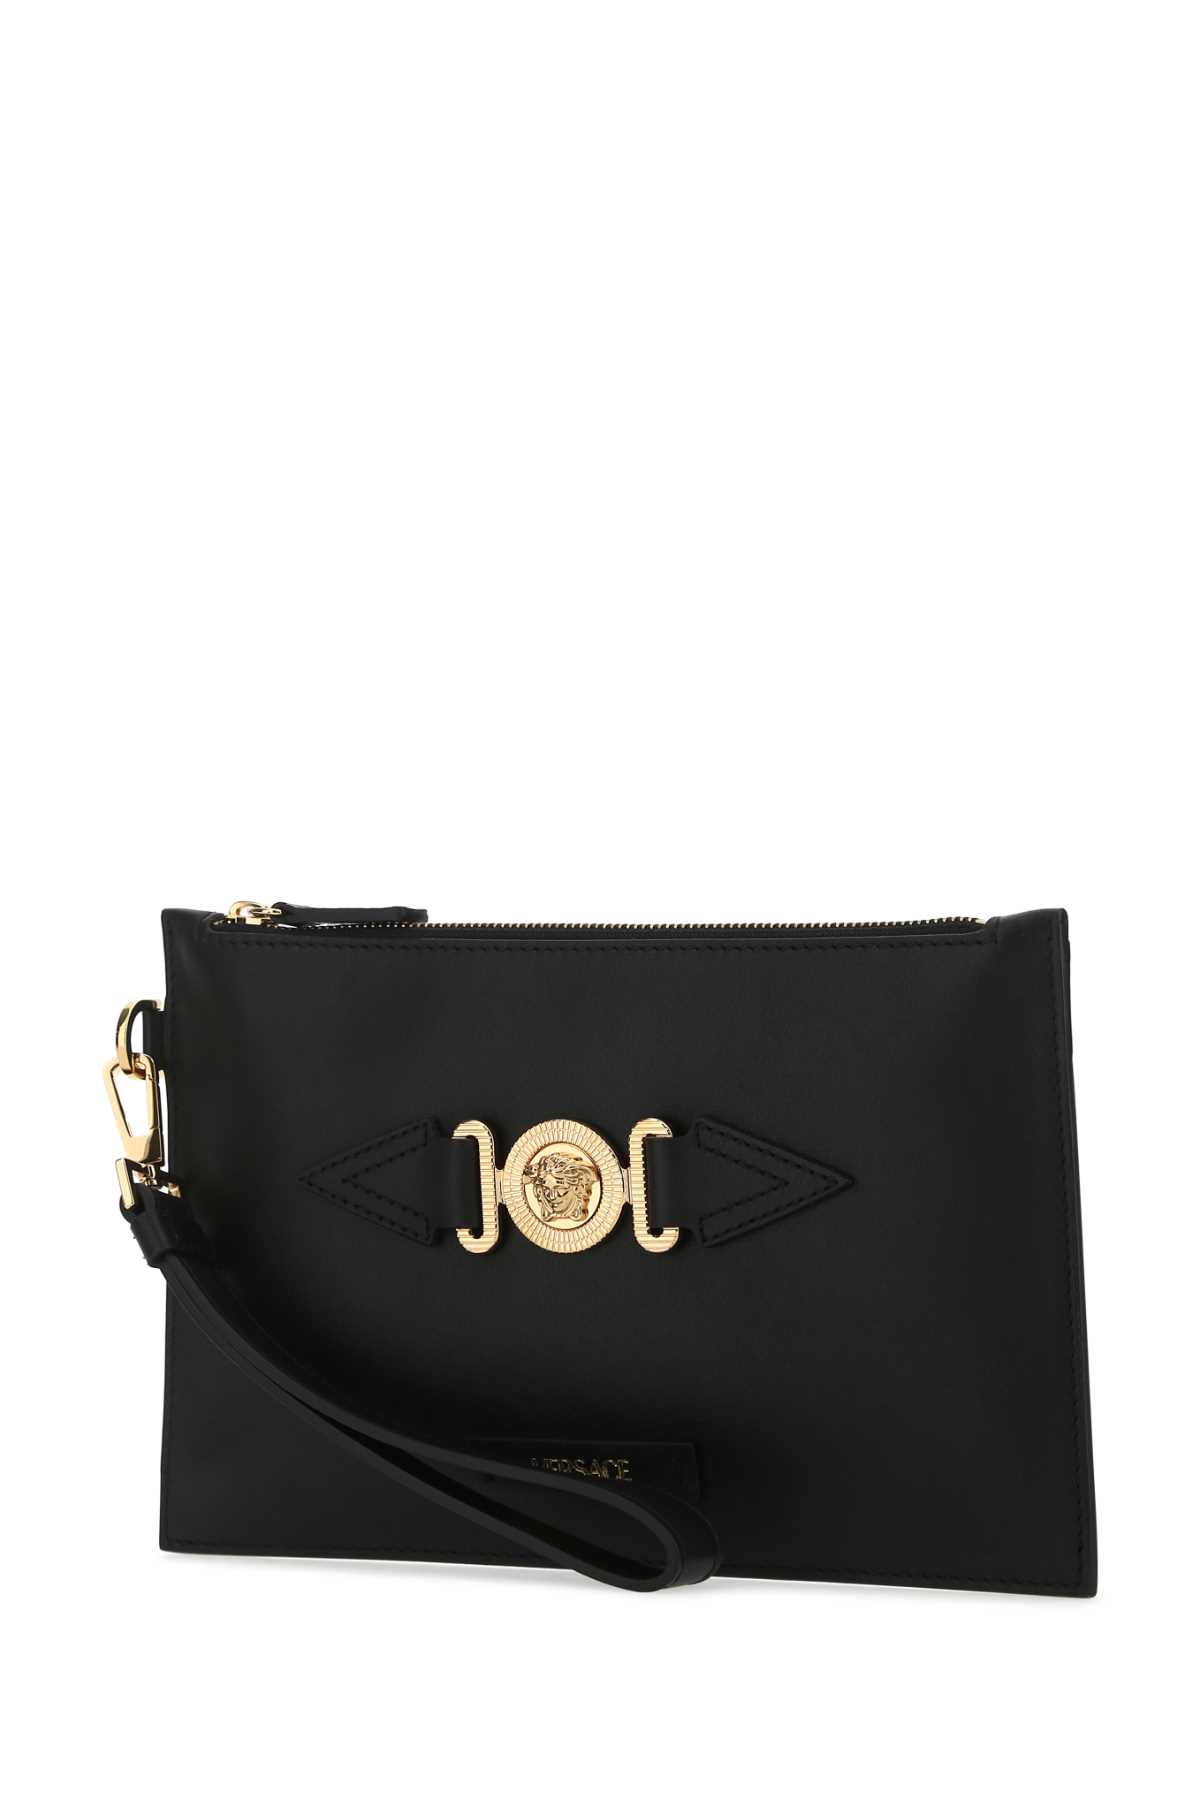 Versace Black Leather Clutch In 1b00v